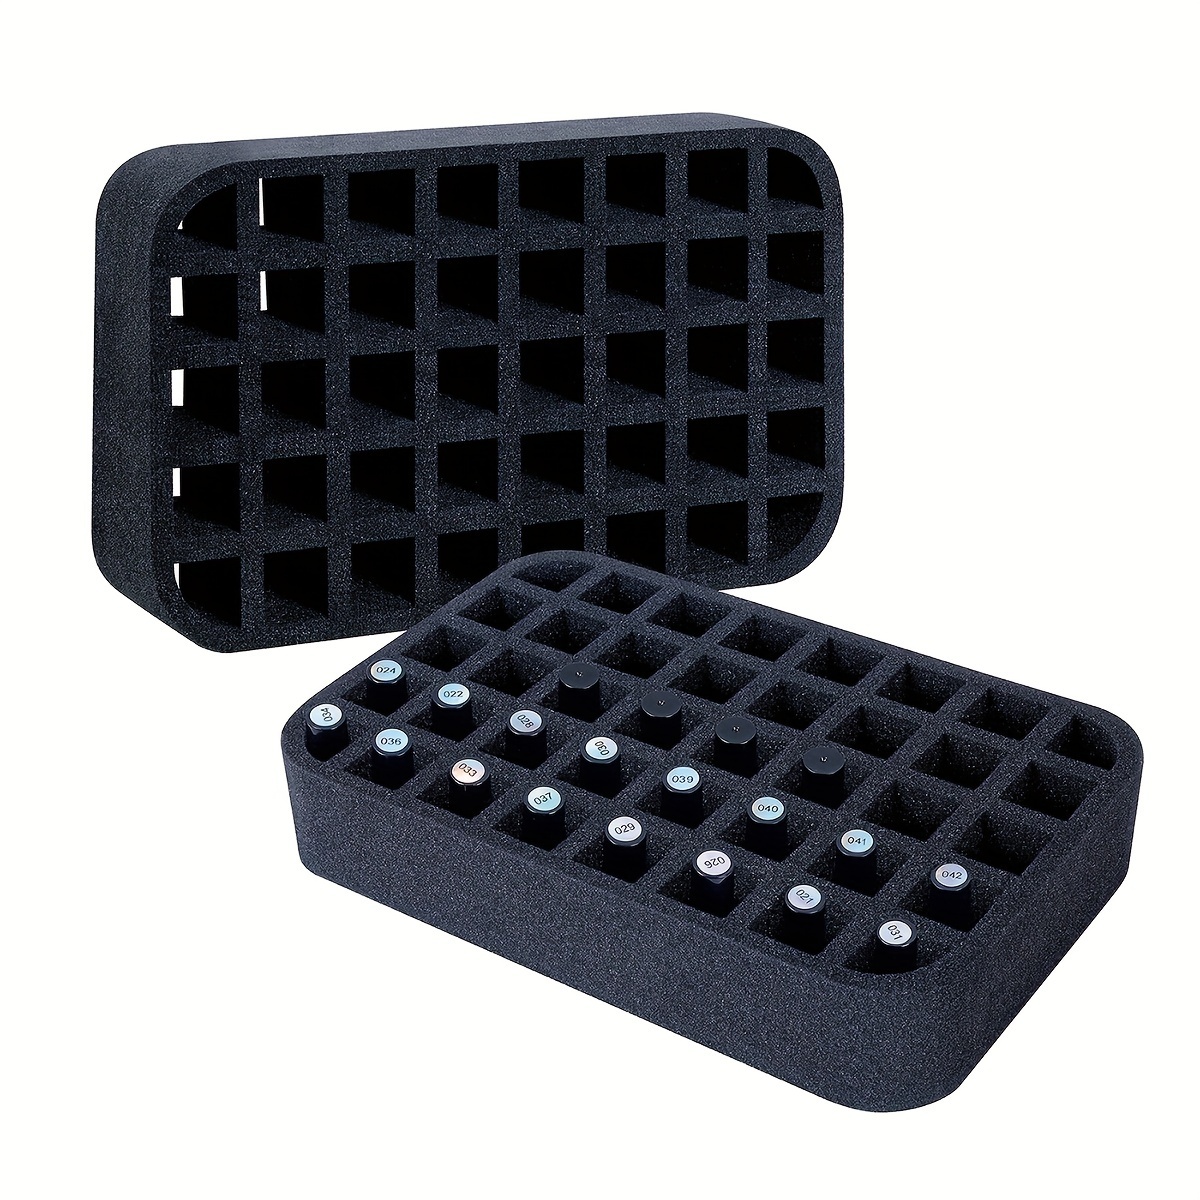 

30/40-slot Foam Padded Removable Bottom Divider Holds 15 Ml (0.5 Oz) Bottles Of Nail Polish Or Essential Oil Storage Tools